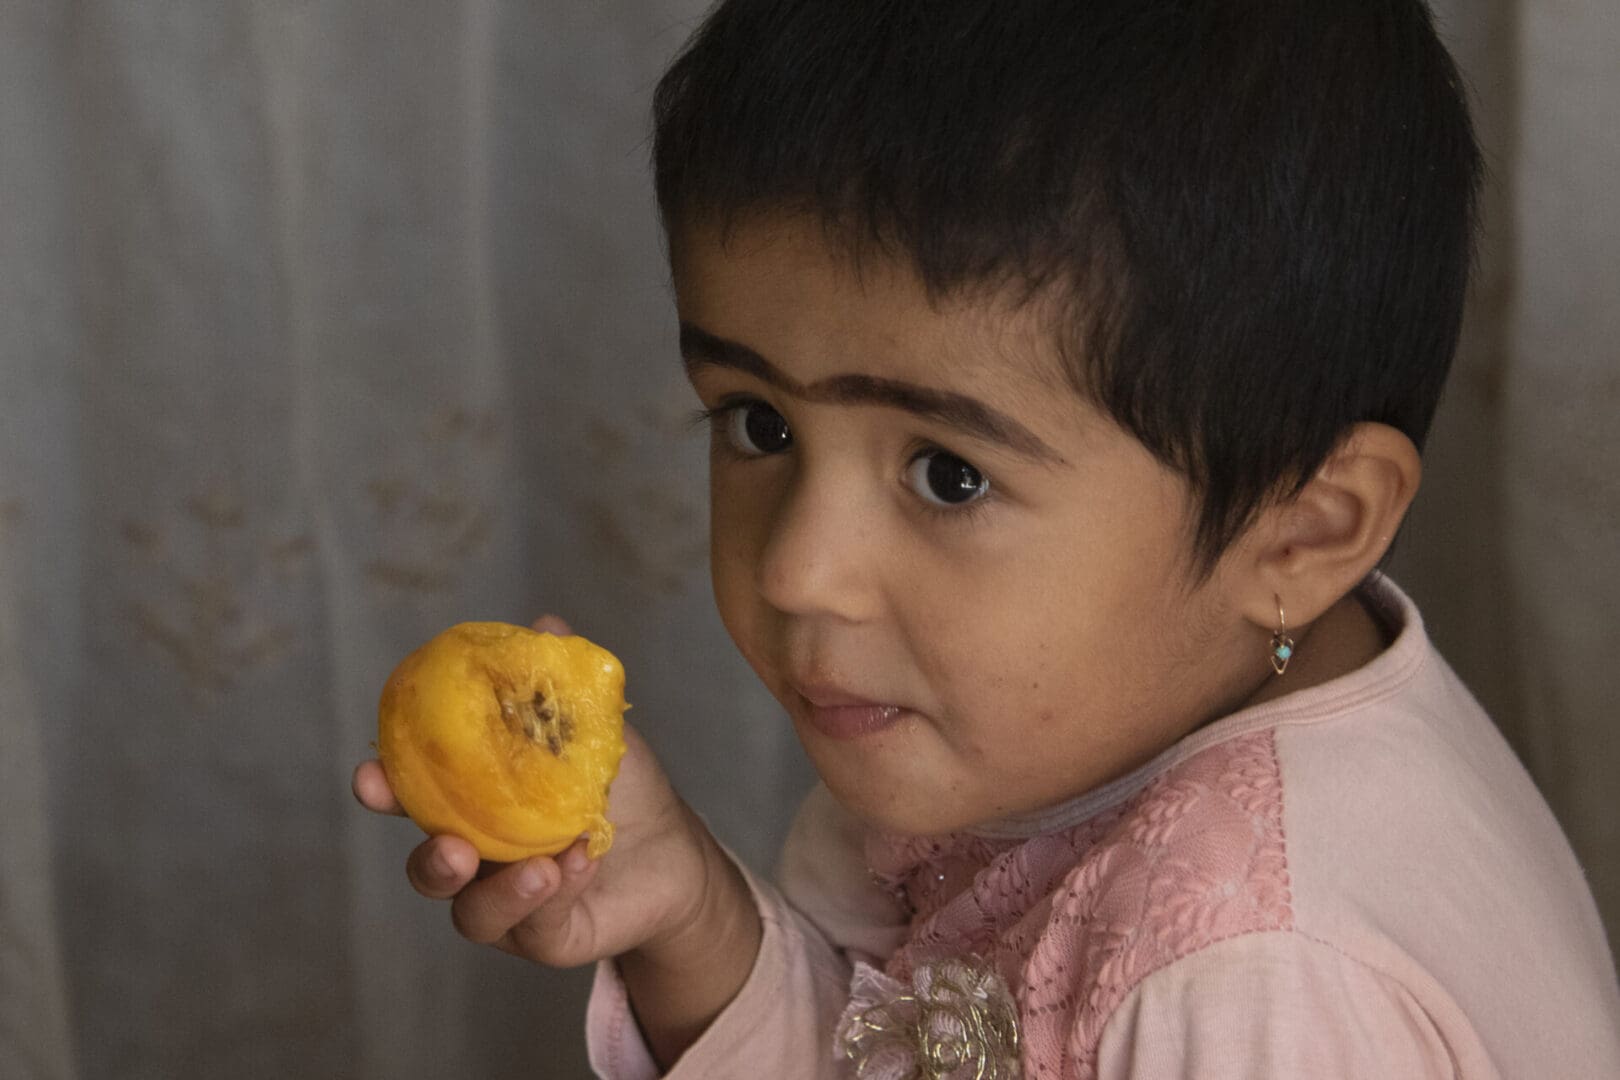 A child is eating a piece of fruit.